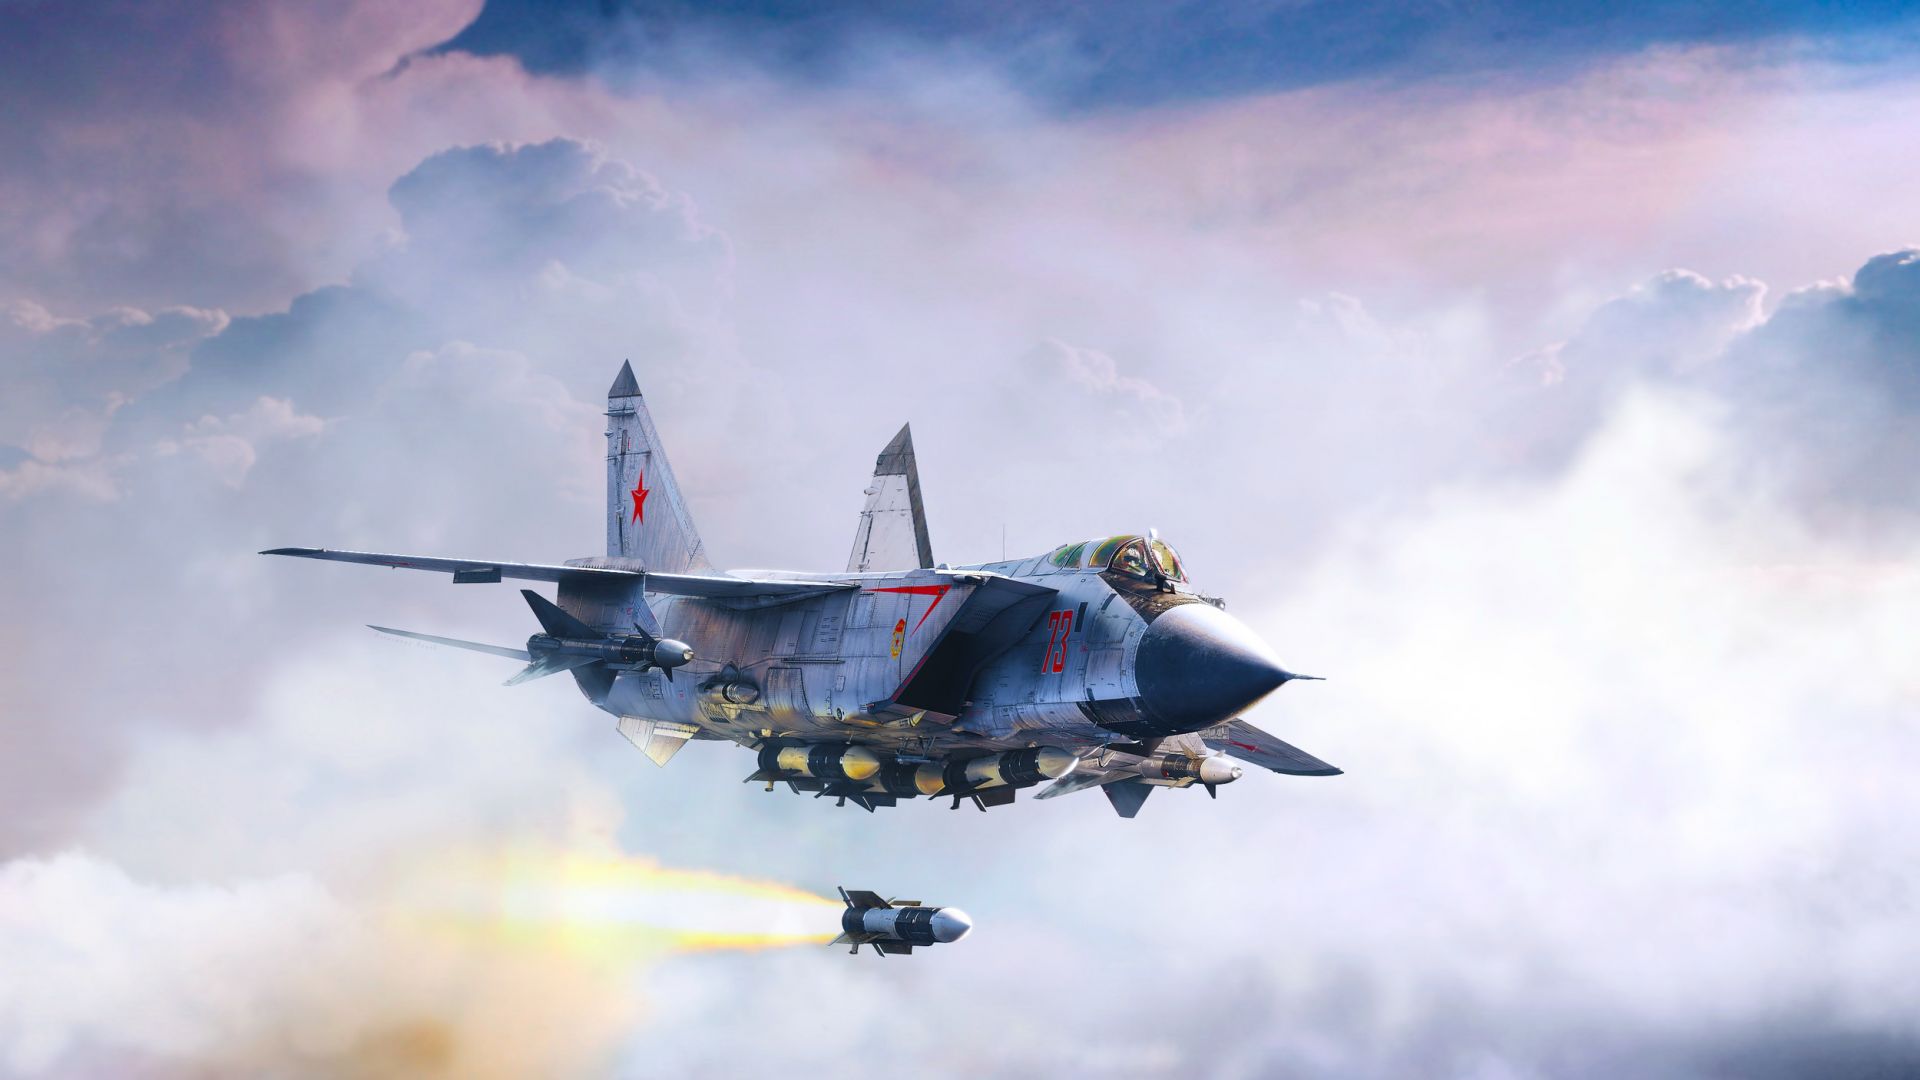 Wallpaper Mikoyan MiG-31, fighter aircraft, clouds, sky